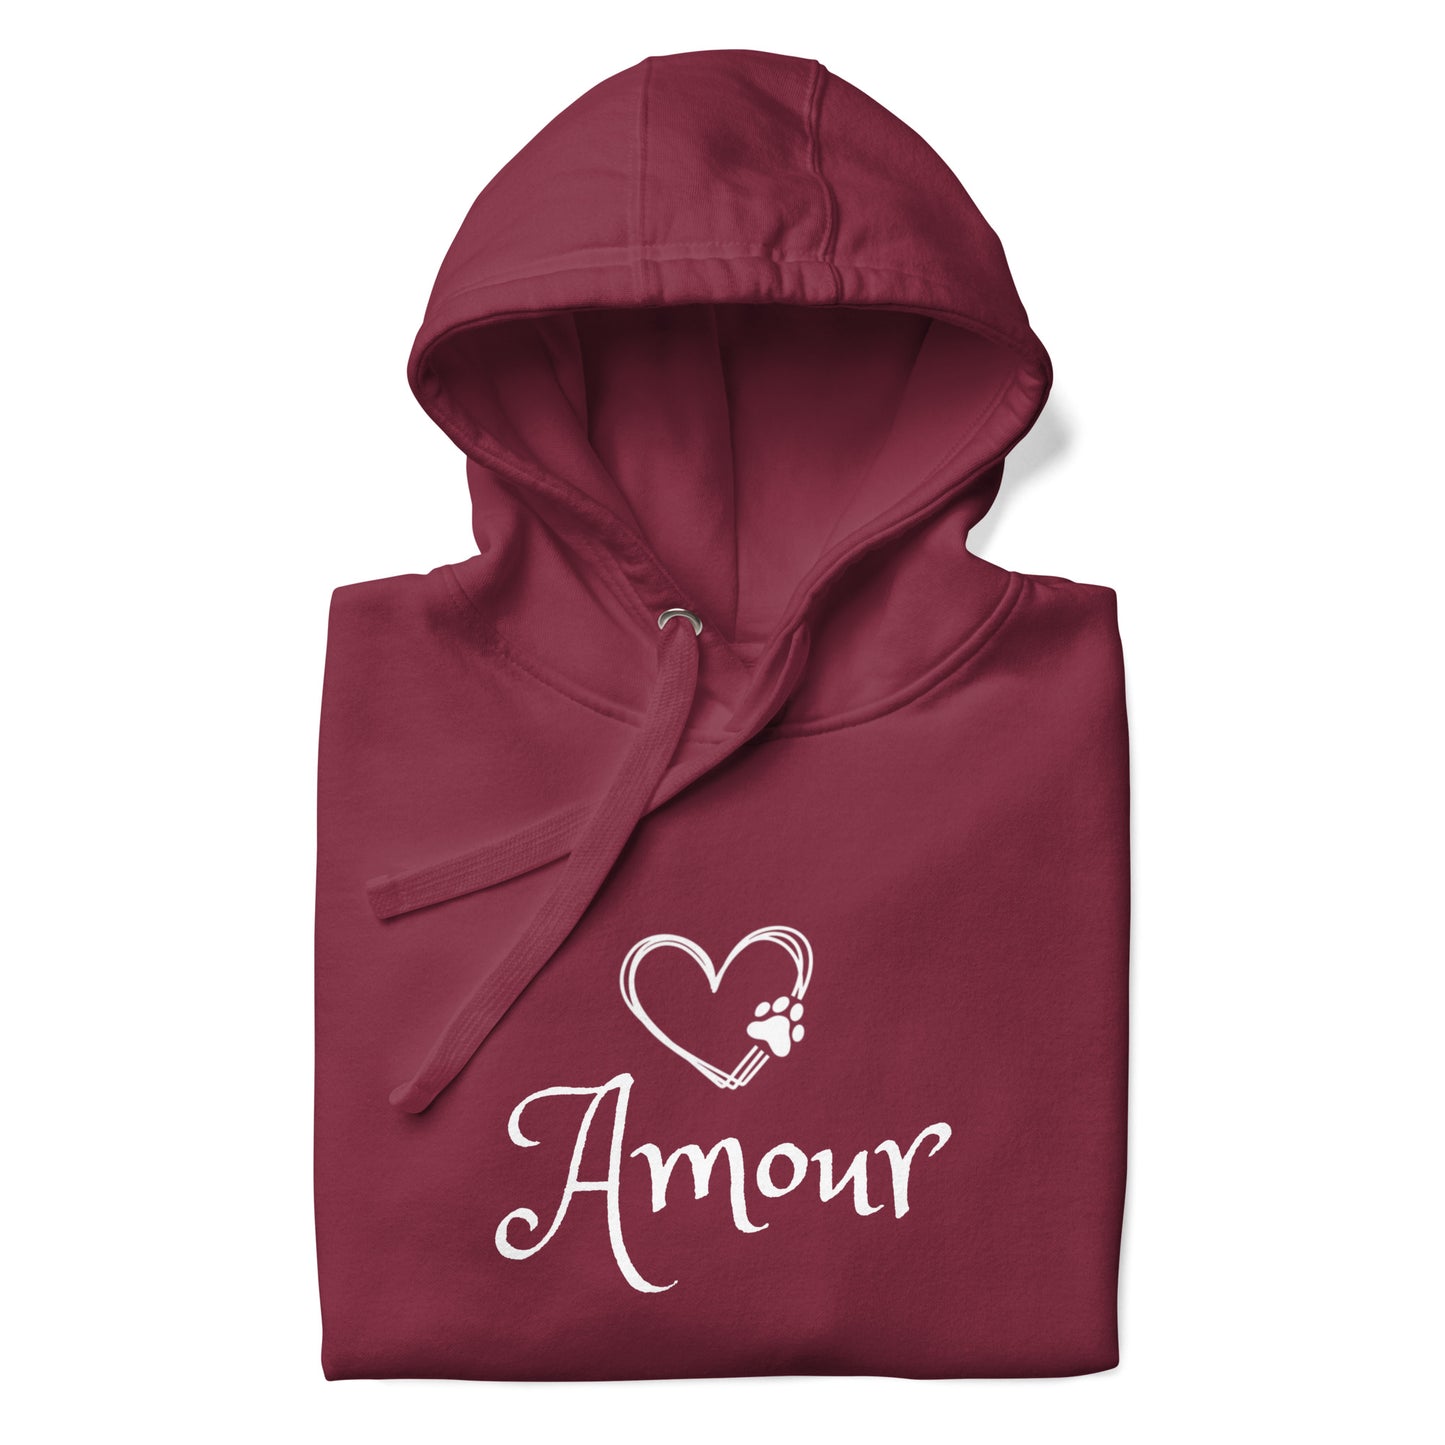 Amour - Hoodie